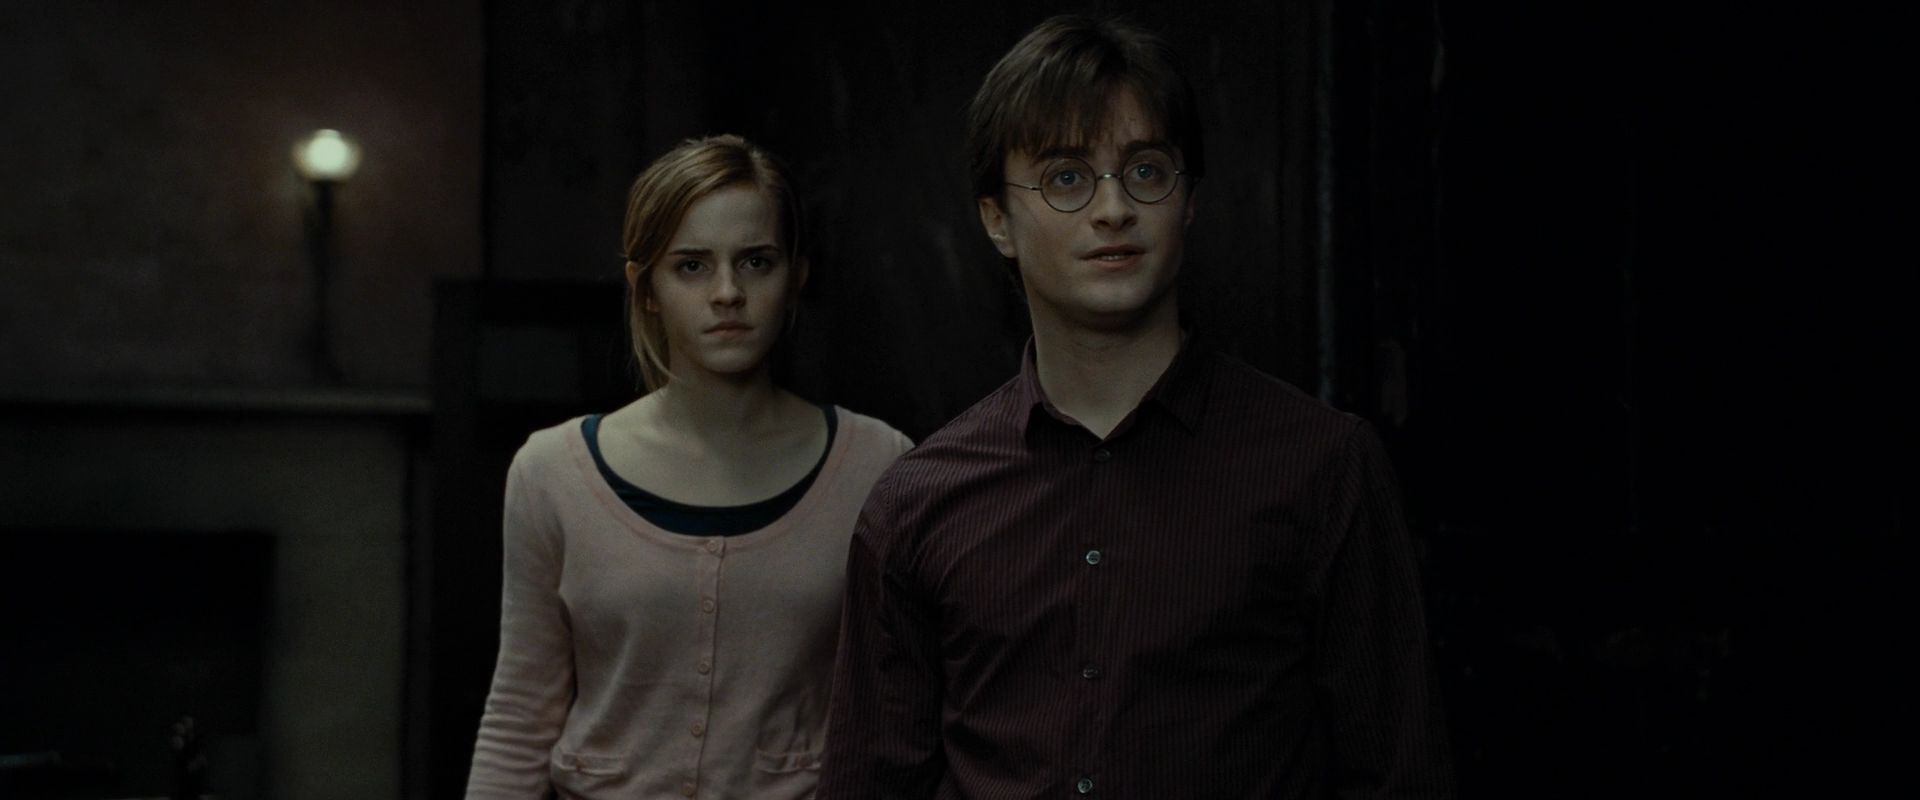 Harry and Hermione Images on Fanpop.